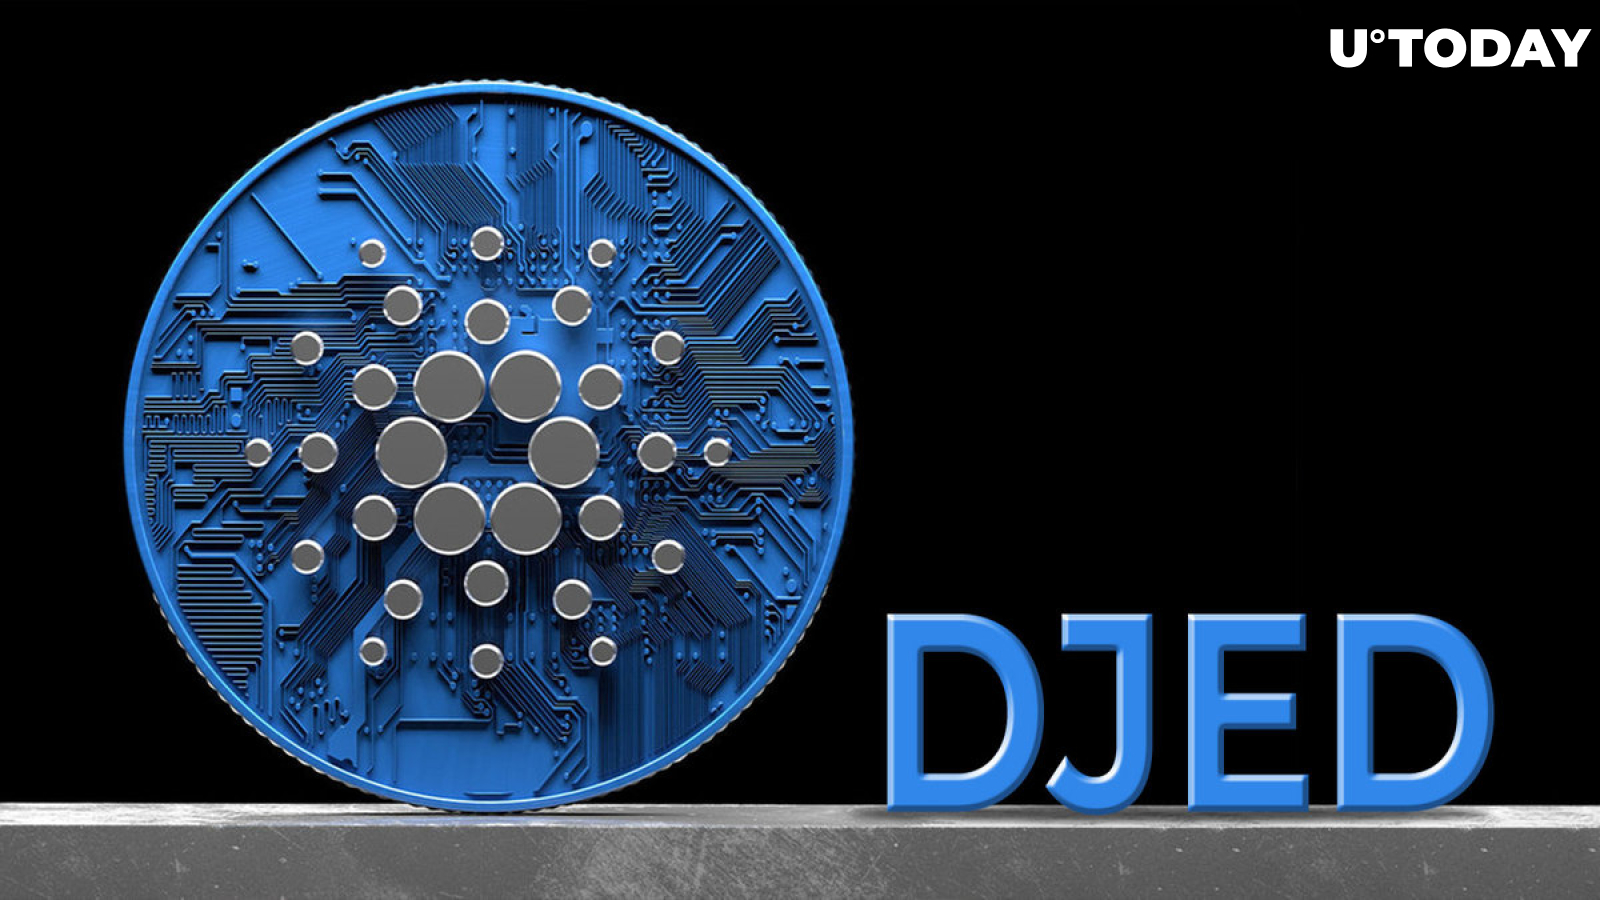 Cardano-Based DJED Stablecoin Falls Below $1, Here's Why